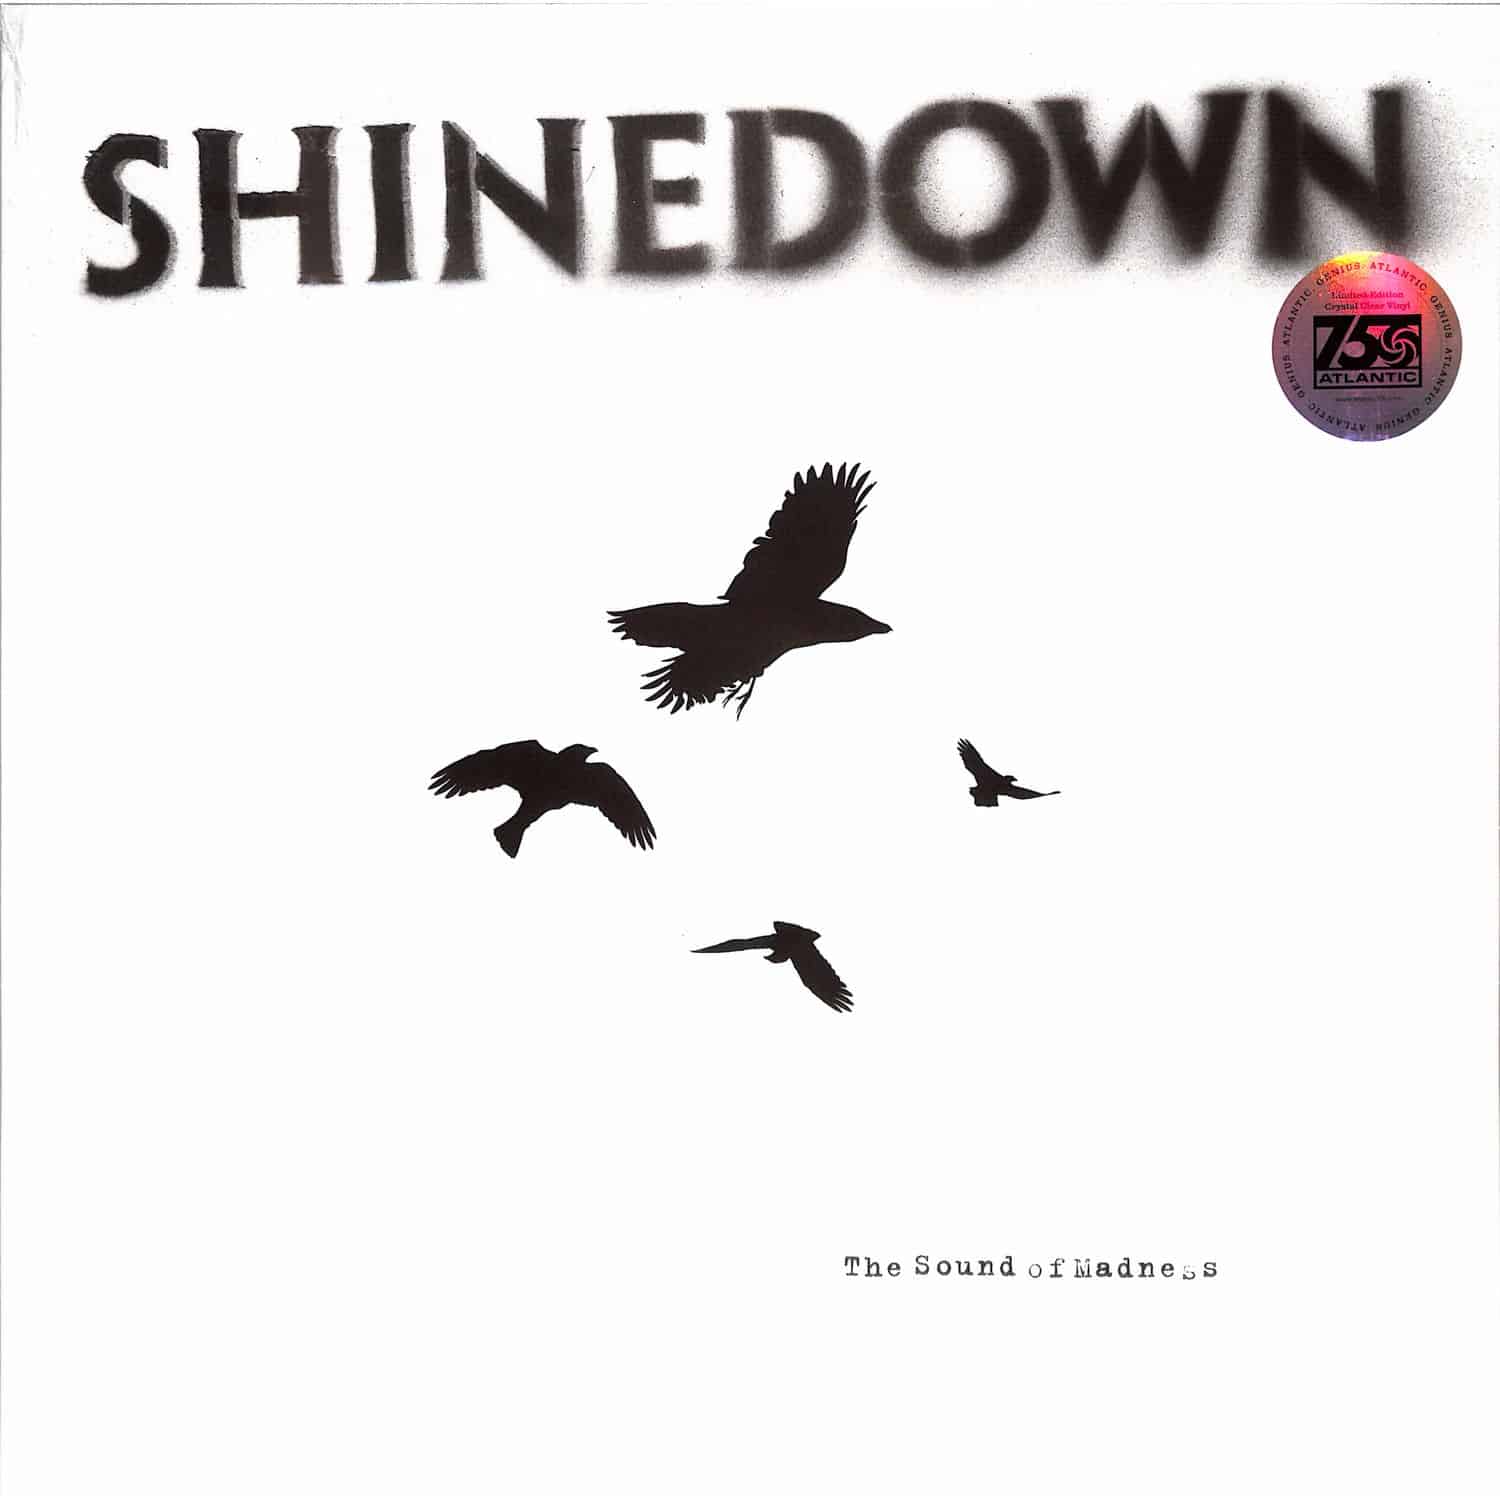 Shinedown - THE SOUND OF MADNESS 